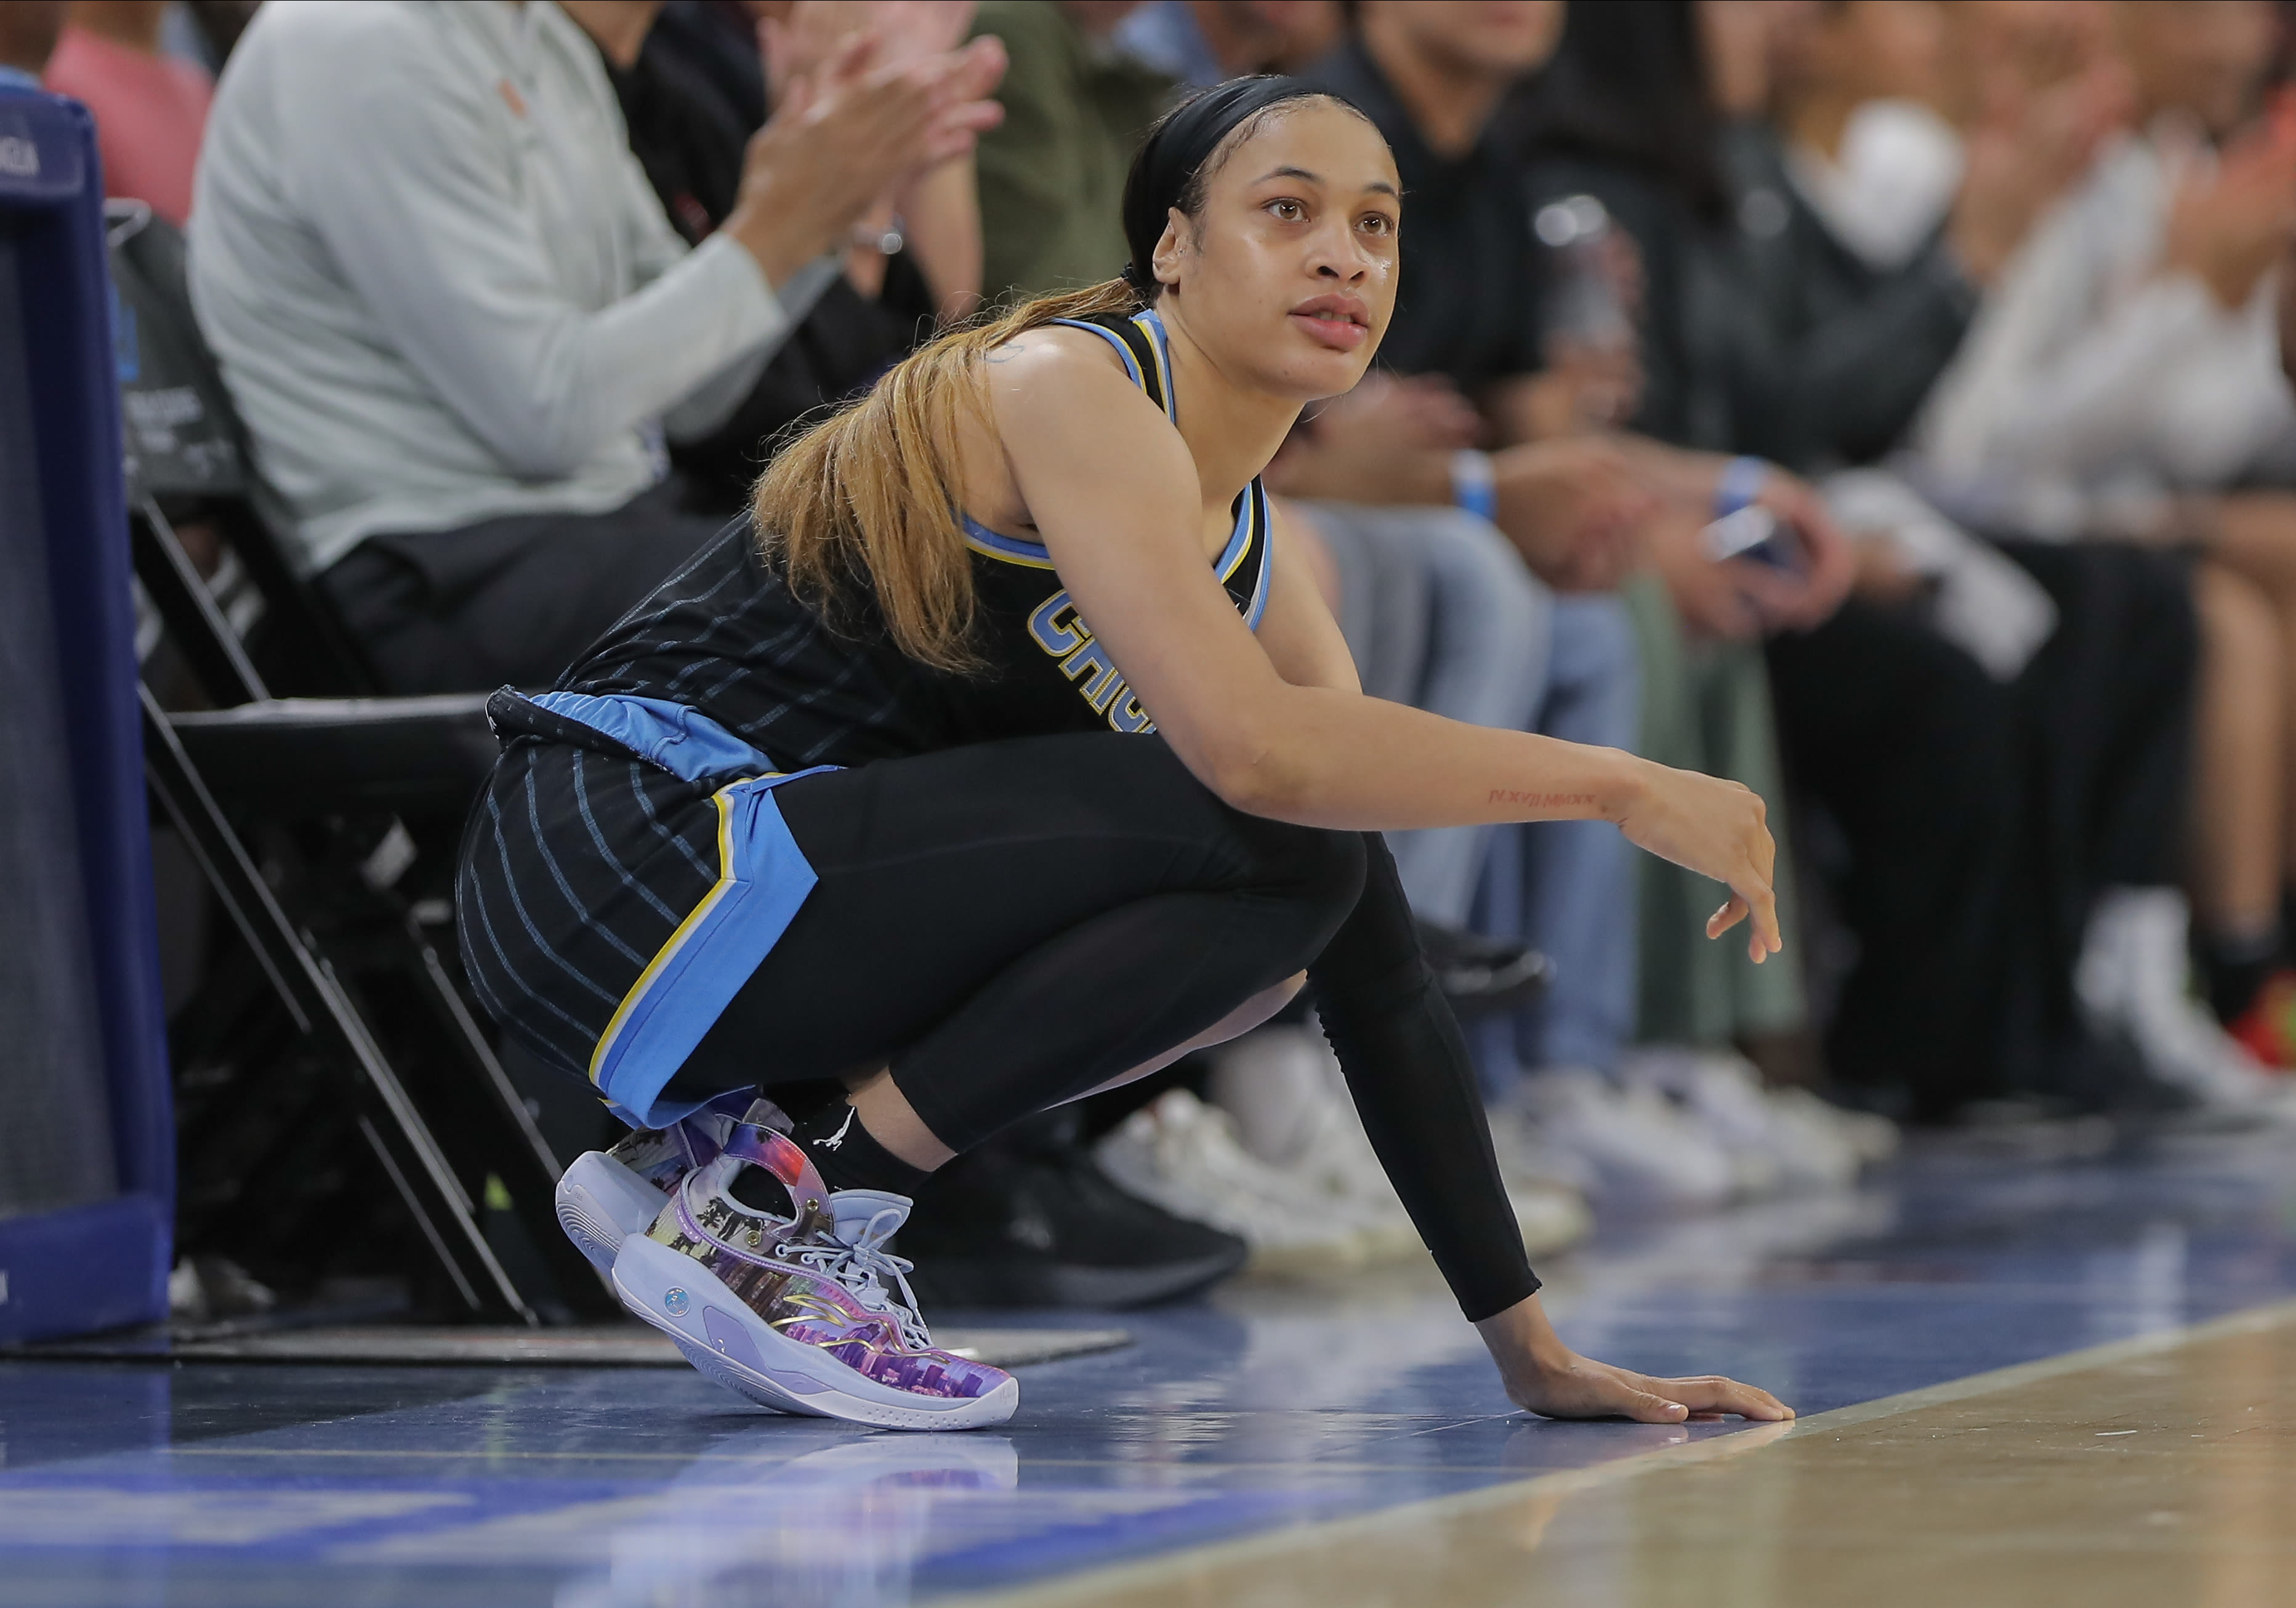 Chicago Sky players report harassment at team hotel after Chennedy Carter's hard foul on Caitlin Clark